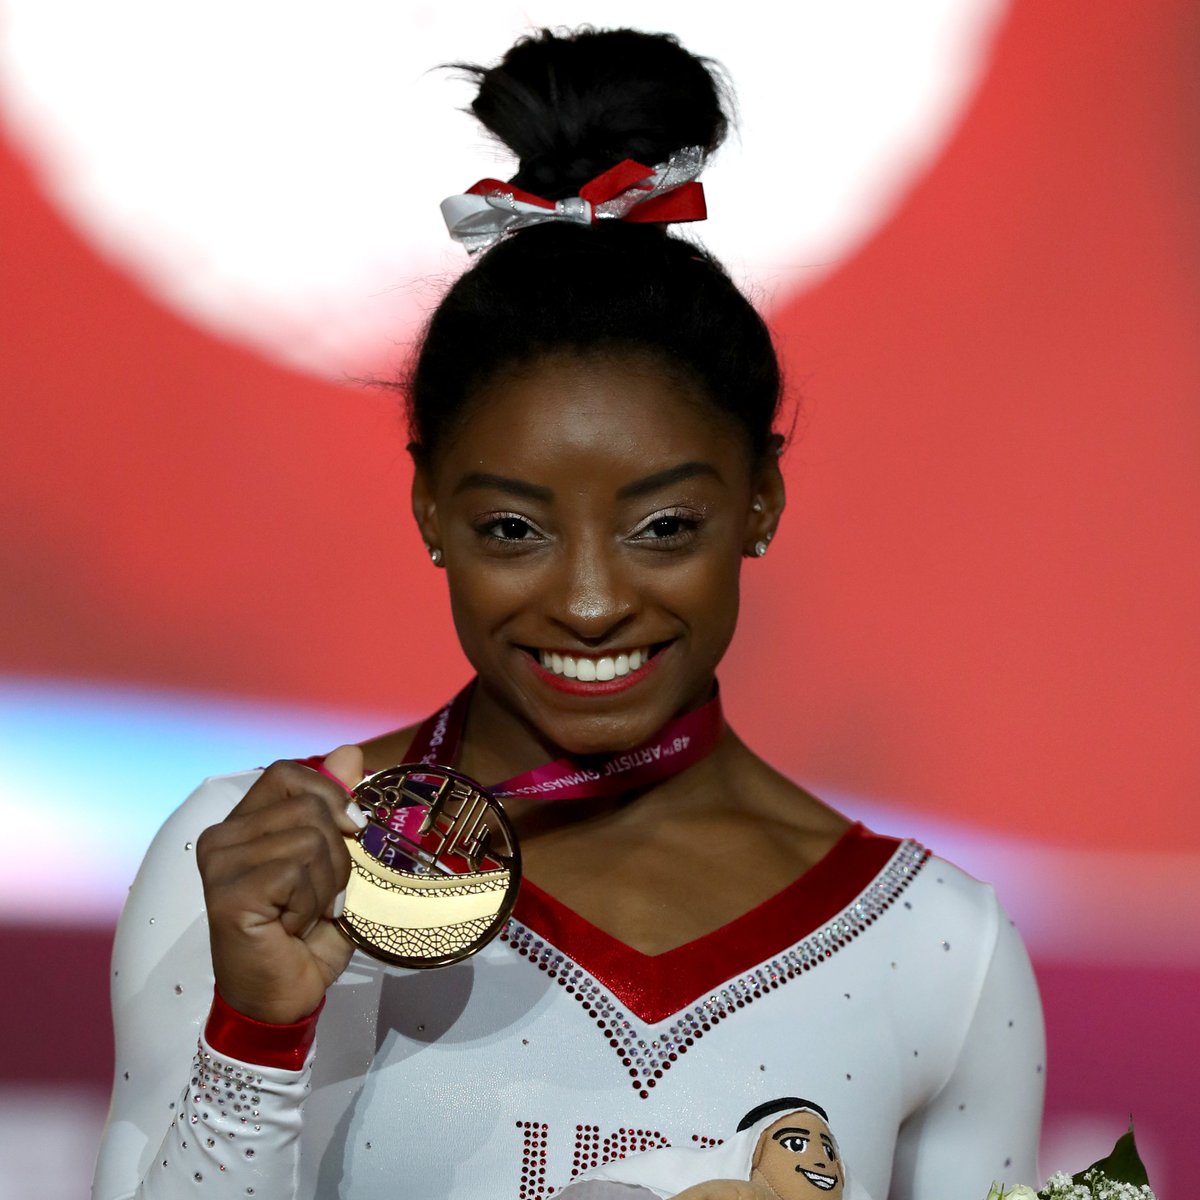  "I'd rather regret the risks that didn't work out than the chances I didn't take at all."30 Olympic and world championship medals,  @Simone_Biles is the most decorated gymnast and continues to push her sport forward - oh, and just the  Laureus Awards to her name...